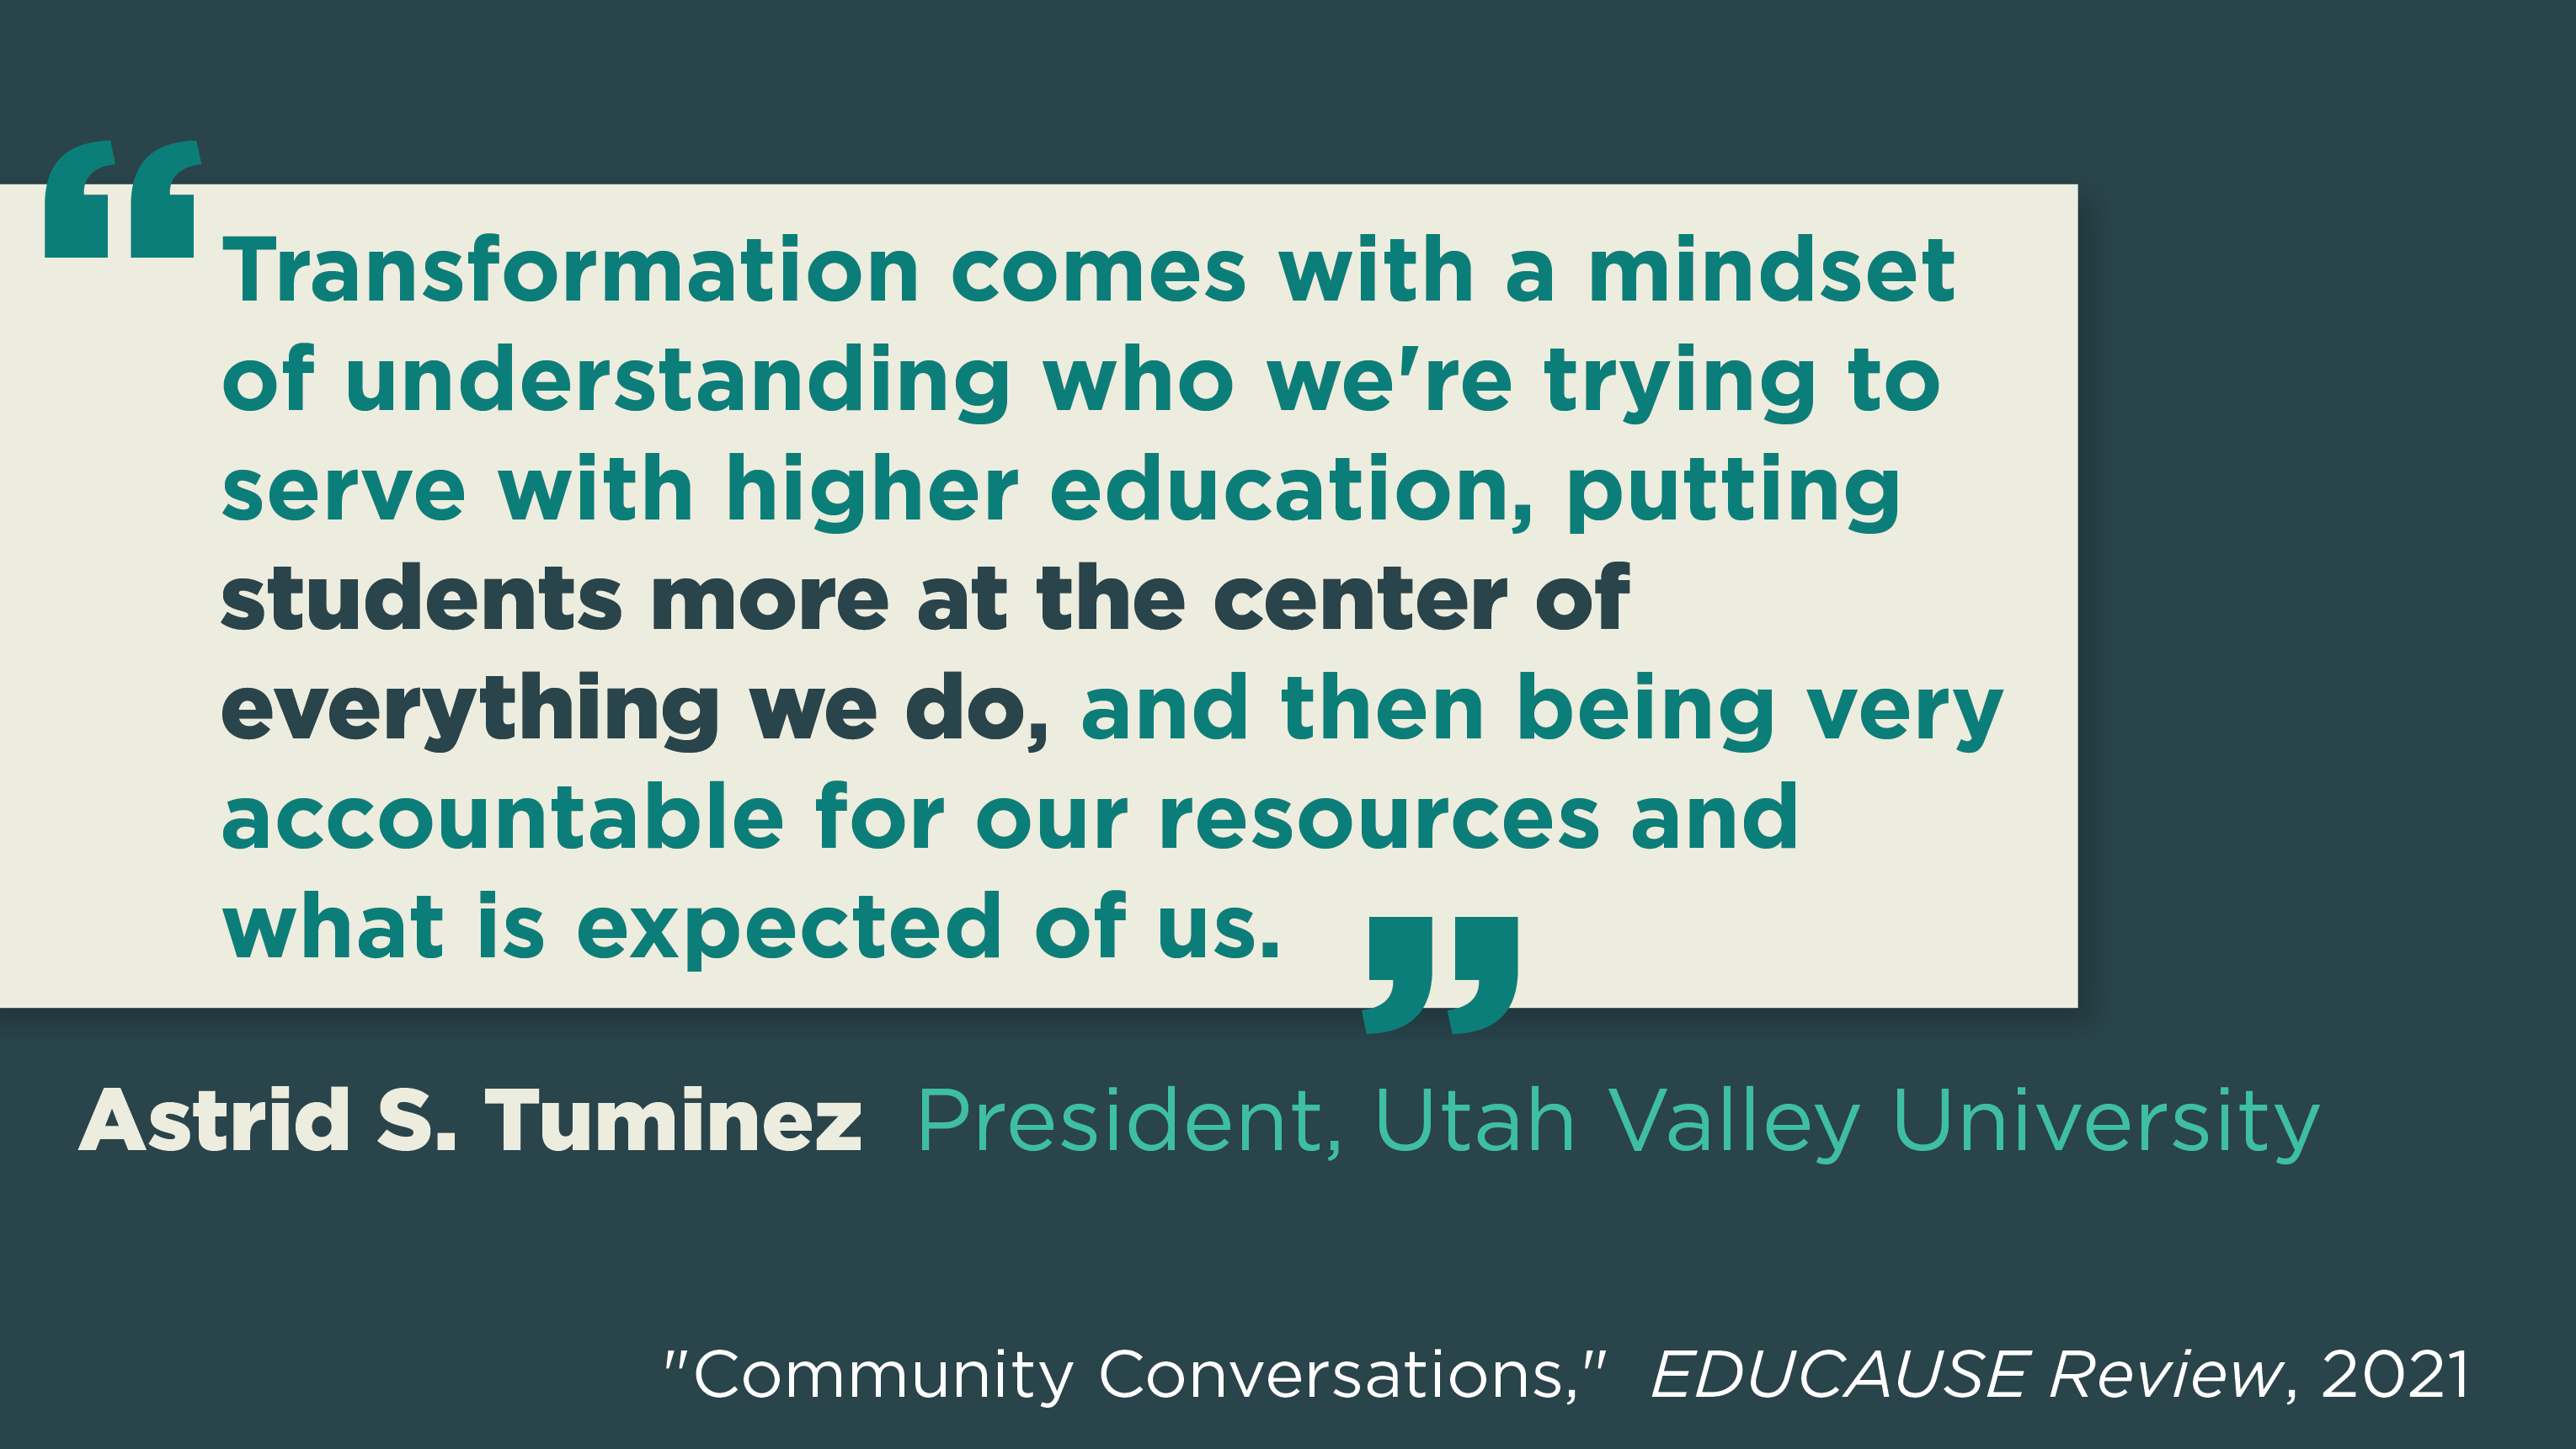 'Transformation comes with a mindset of understanding who we're trying to serve with higher education, putting students more at the center of everything we do, and then being very accountable or our resources and what is expected of us.' Astrid S. Tuminez, President, Utah Valley University. "Community Conversations," EDUCAUSE Review, 2021.